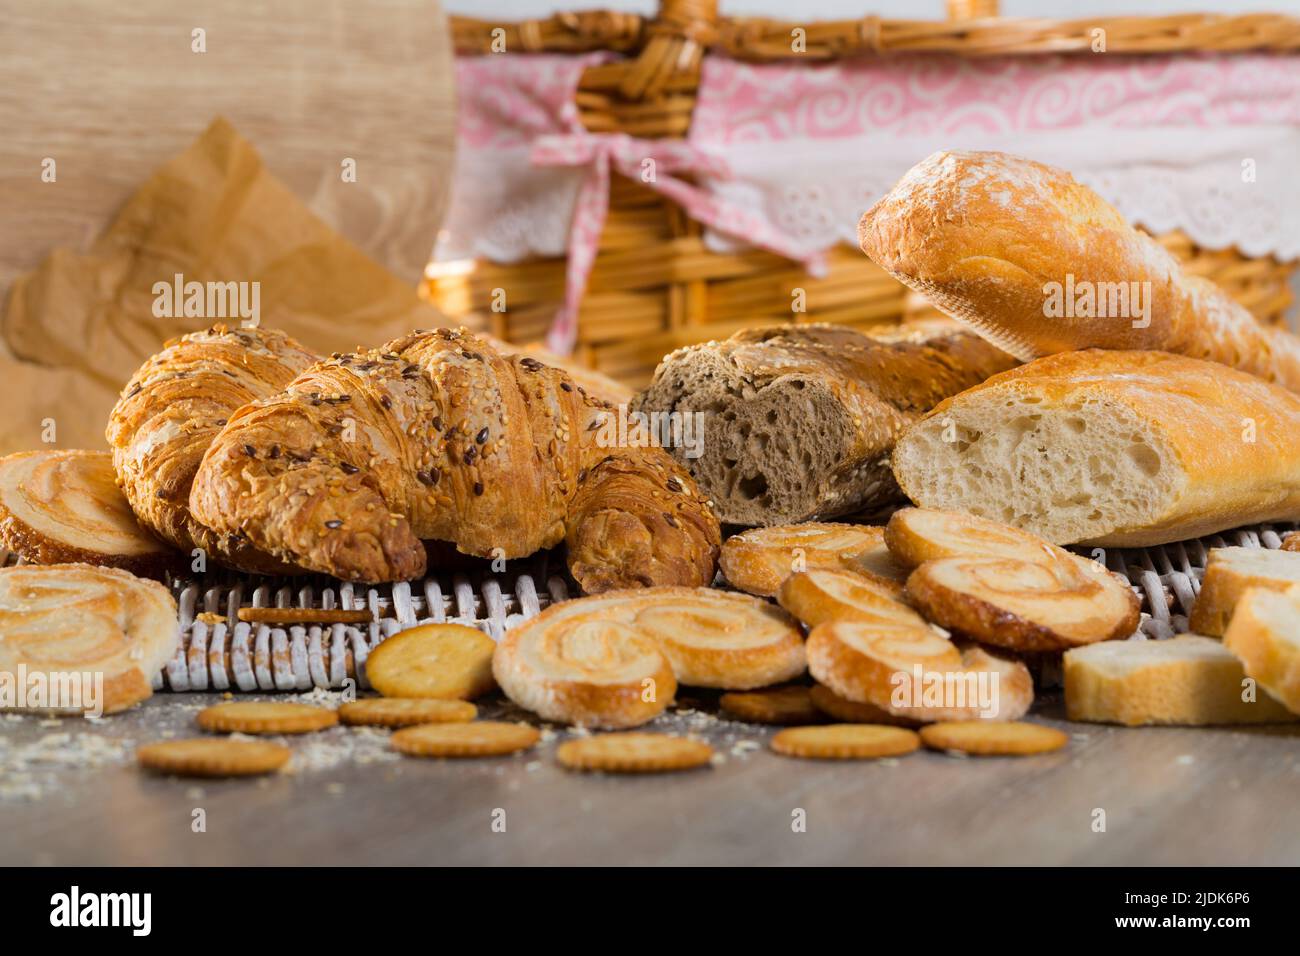 Various bakery products on rattan mat Stock Photo